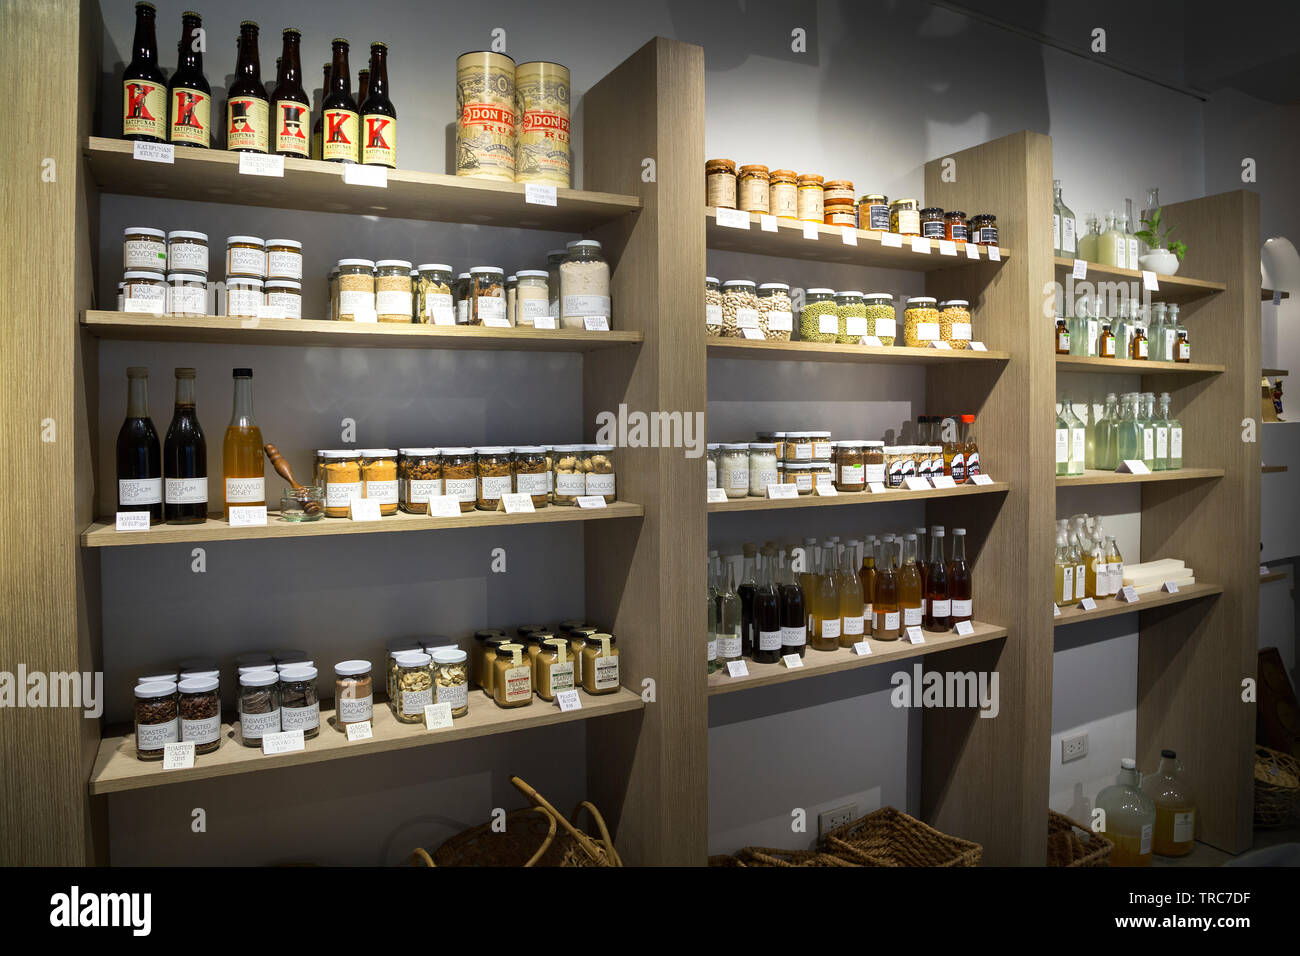 Manila, Philippines - August, 4, 2016: Wooden shelves in a shop full og jars and bottles with natural organic products Stock Photo